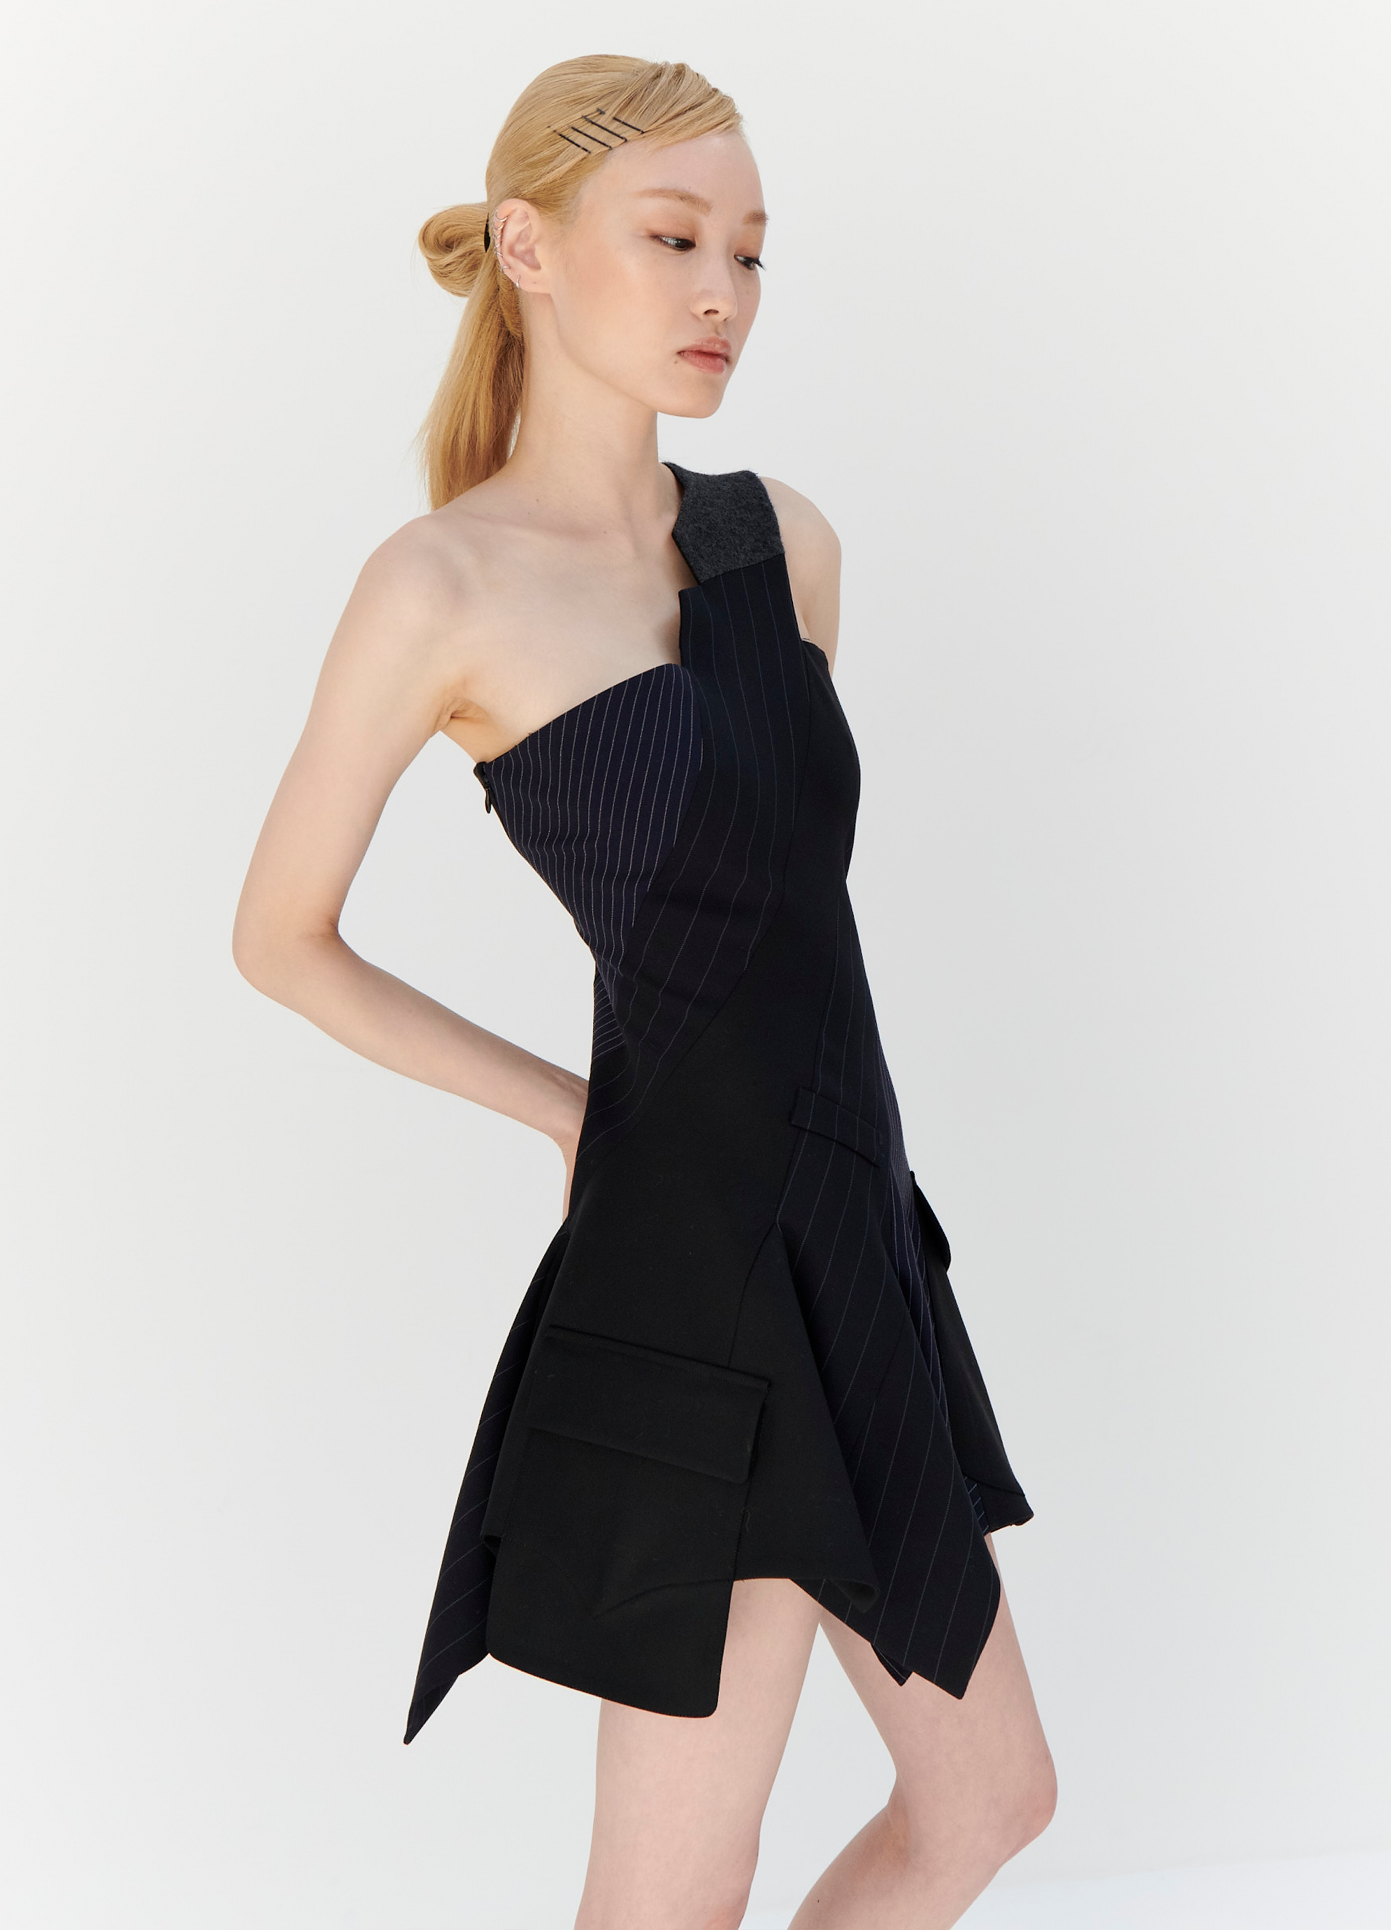 MONSE One Shoulder Tailored Dress in Midnight on model right side view